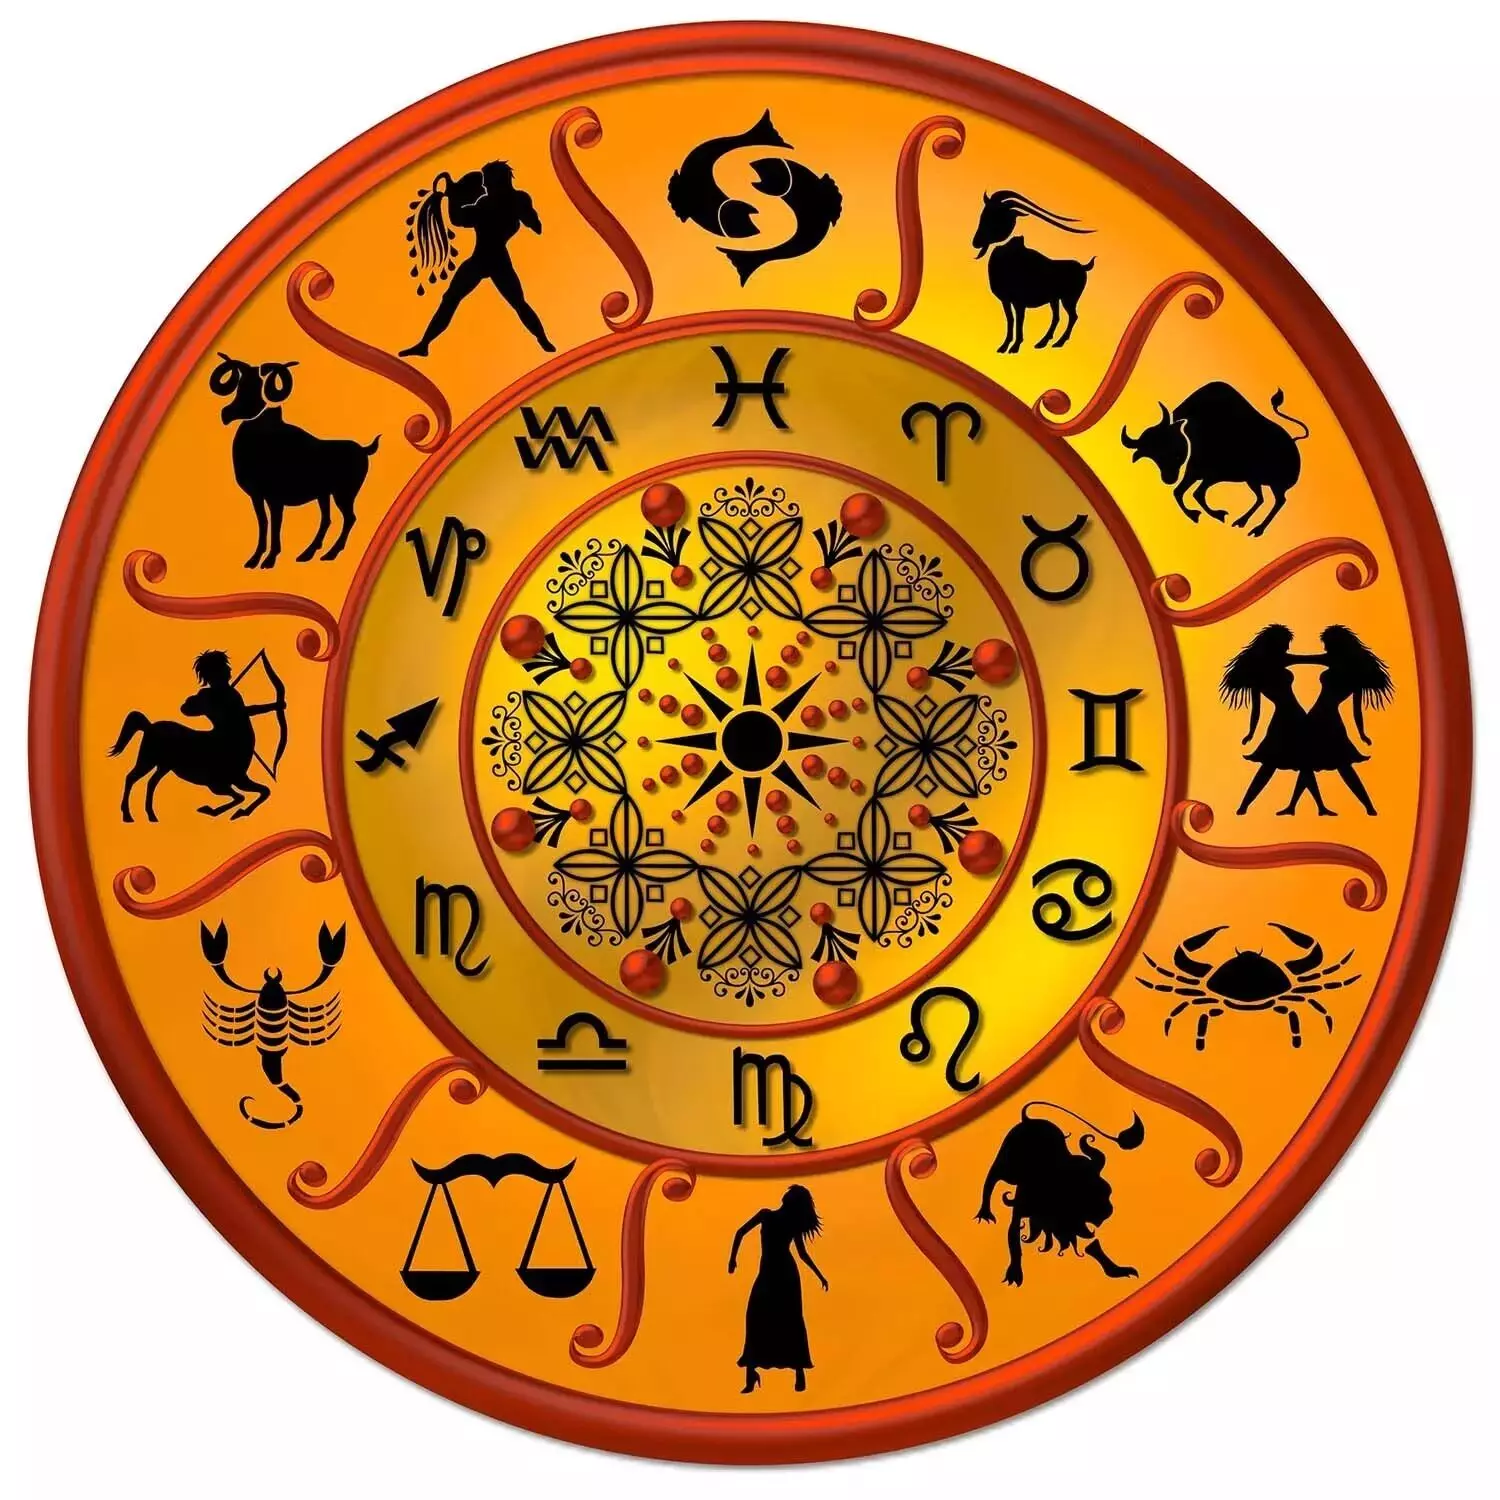 26 August  – Know your todays horoscope